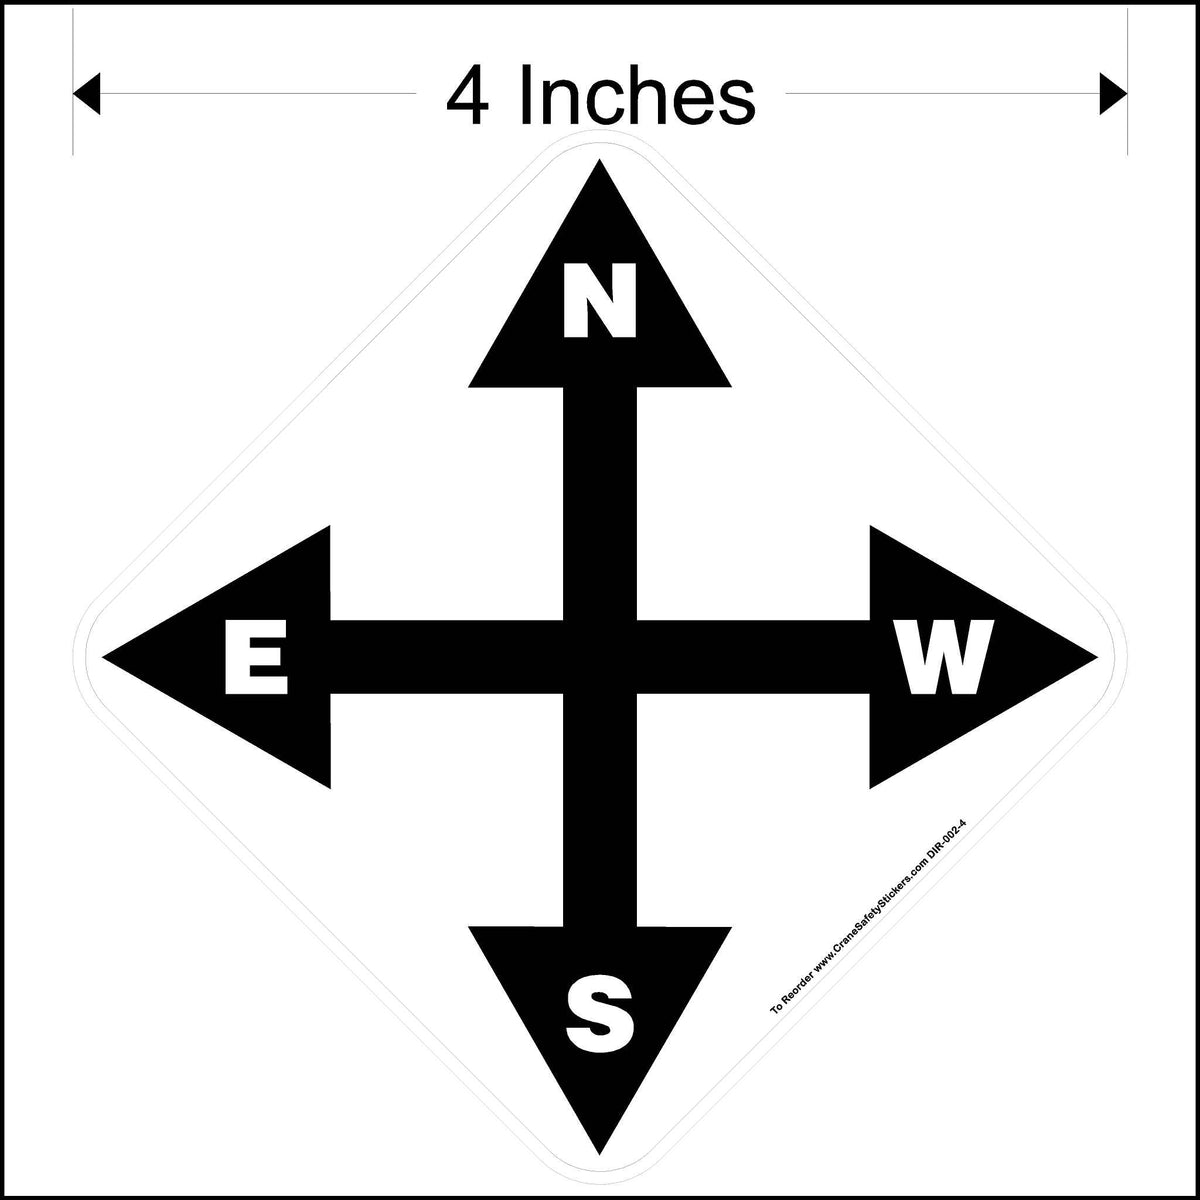 4 Inch North South West East Overhead Crane Directional Decal.